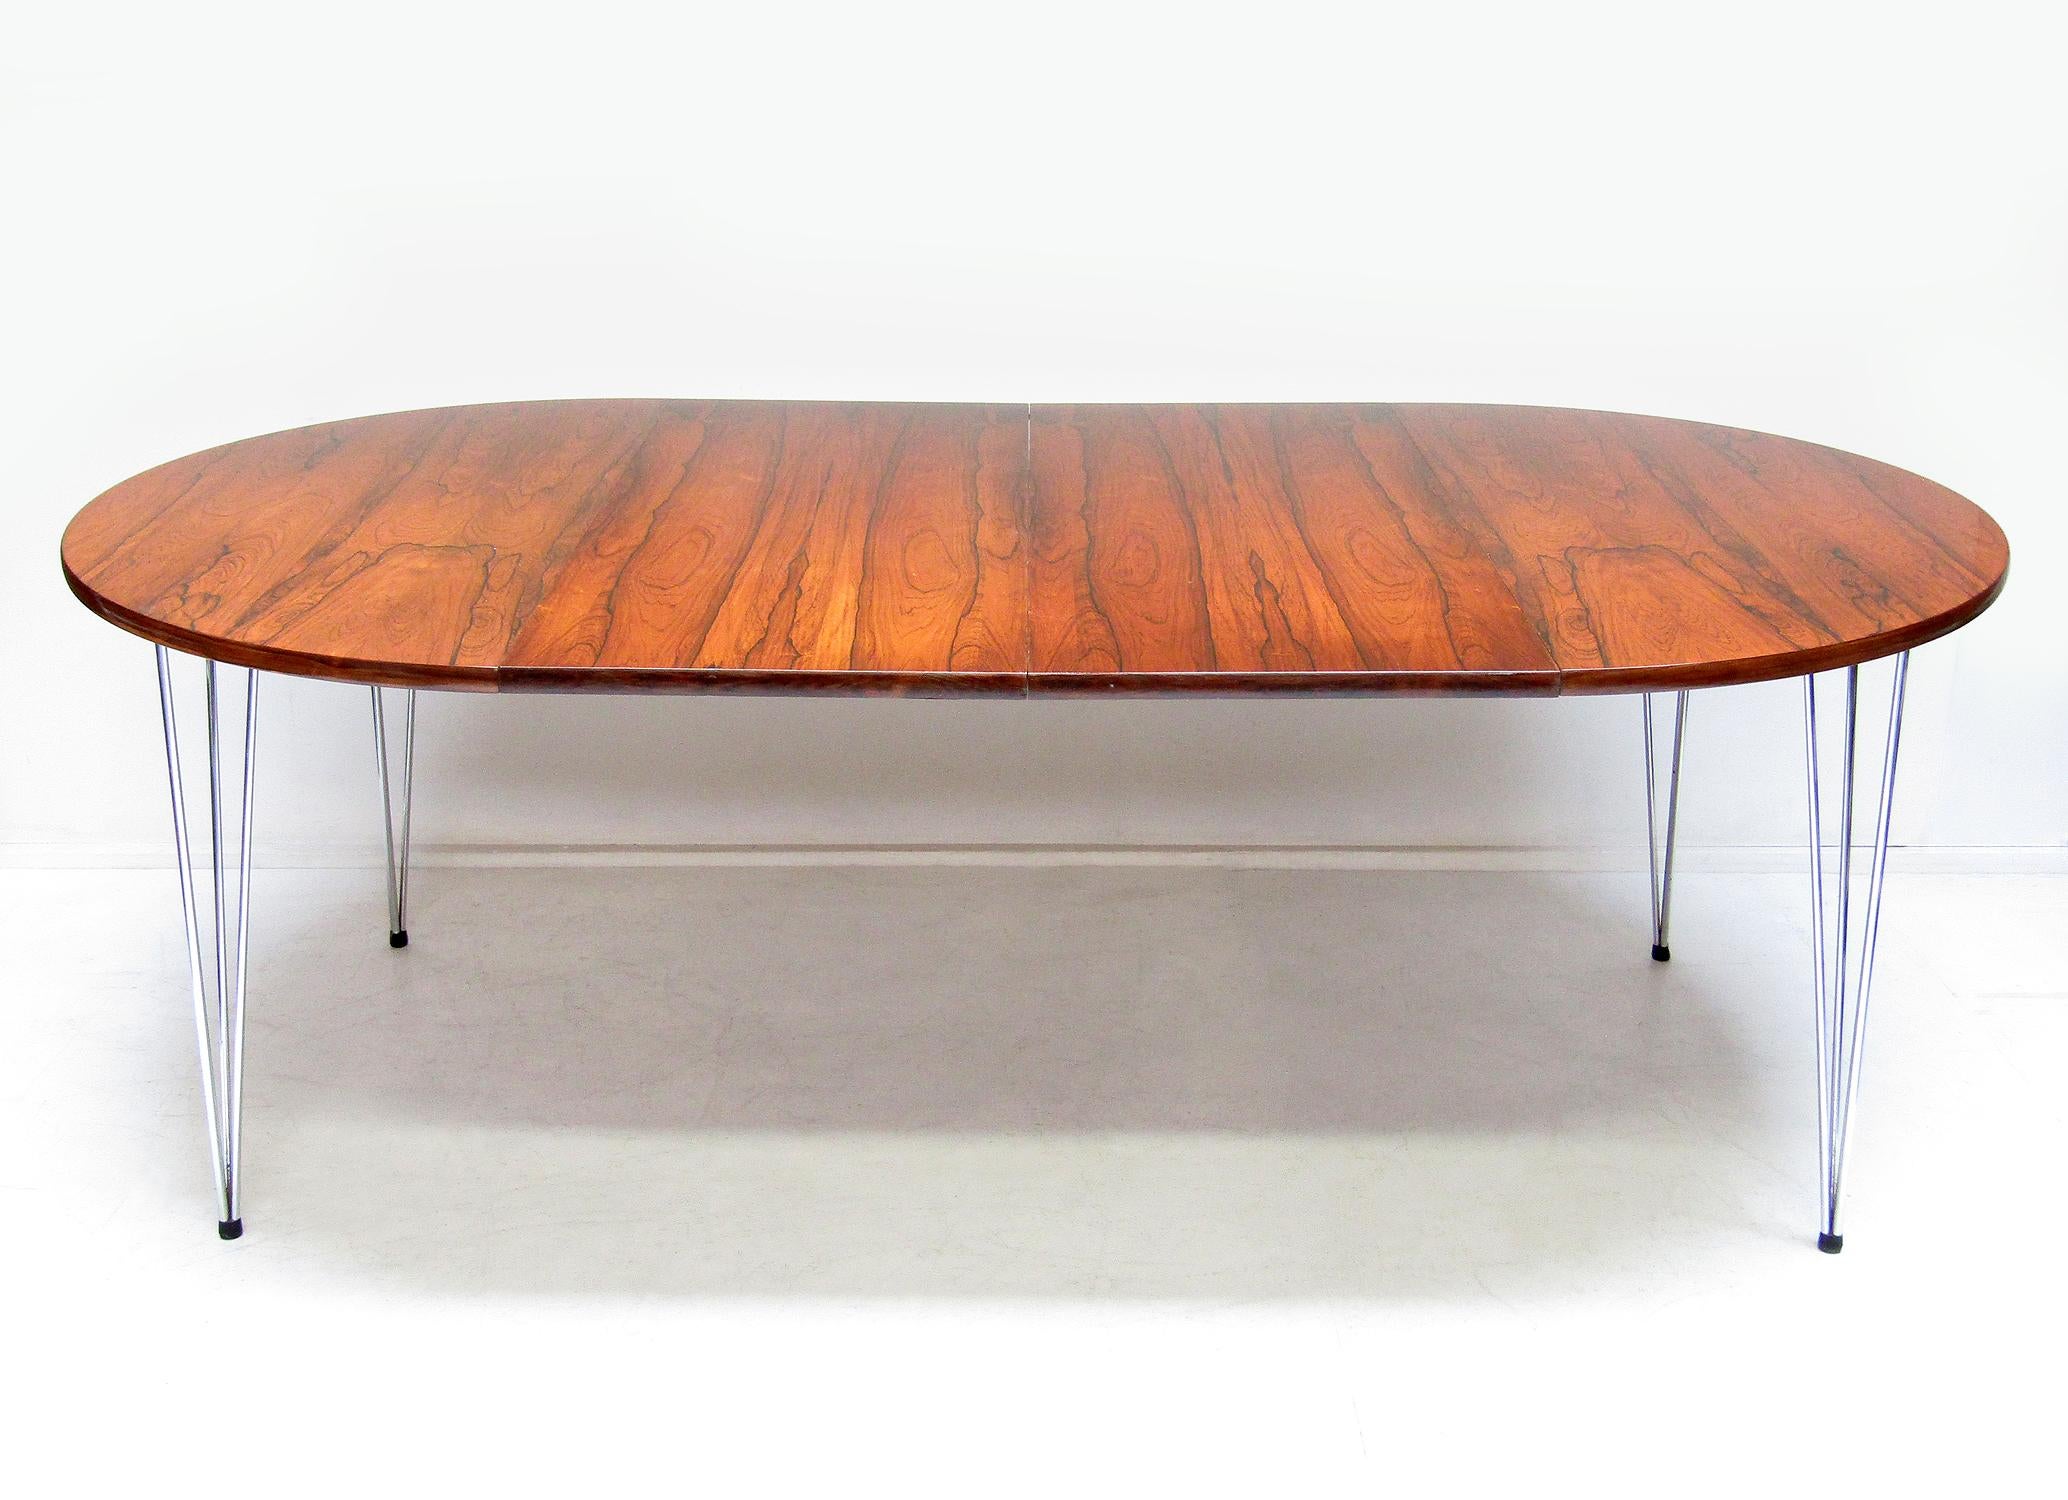 Mid-Century Modern 1960s Norwegian Rosewood & Chrome Extending Dining Table by Hans Brattrud